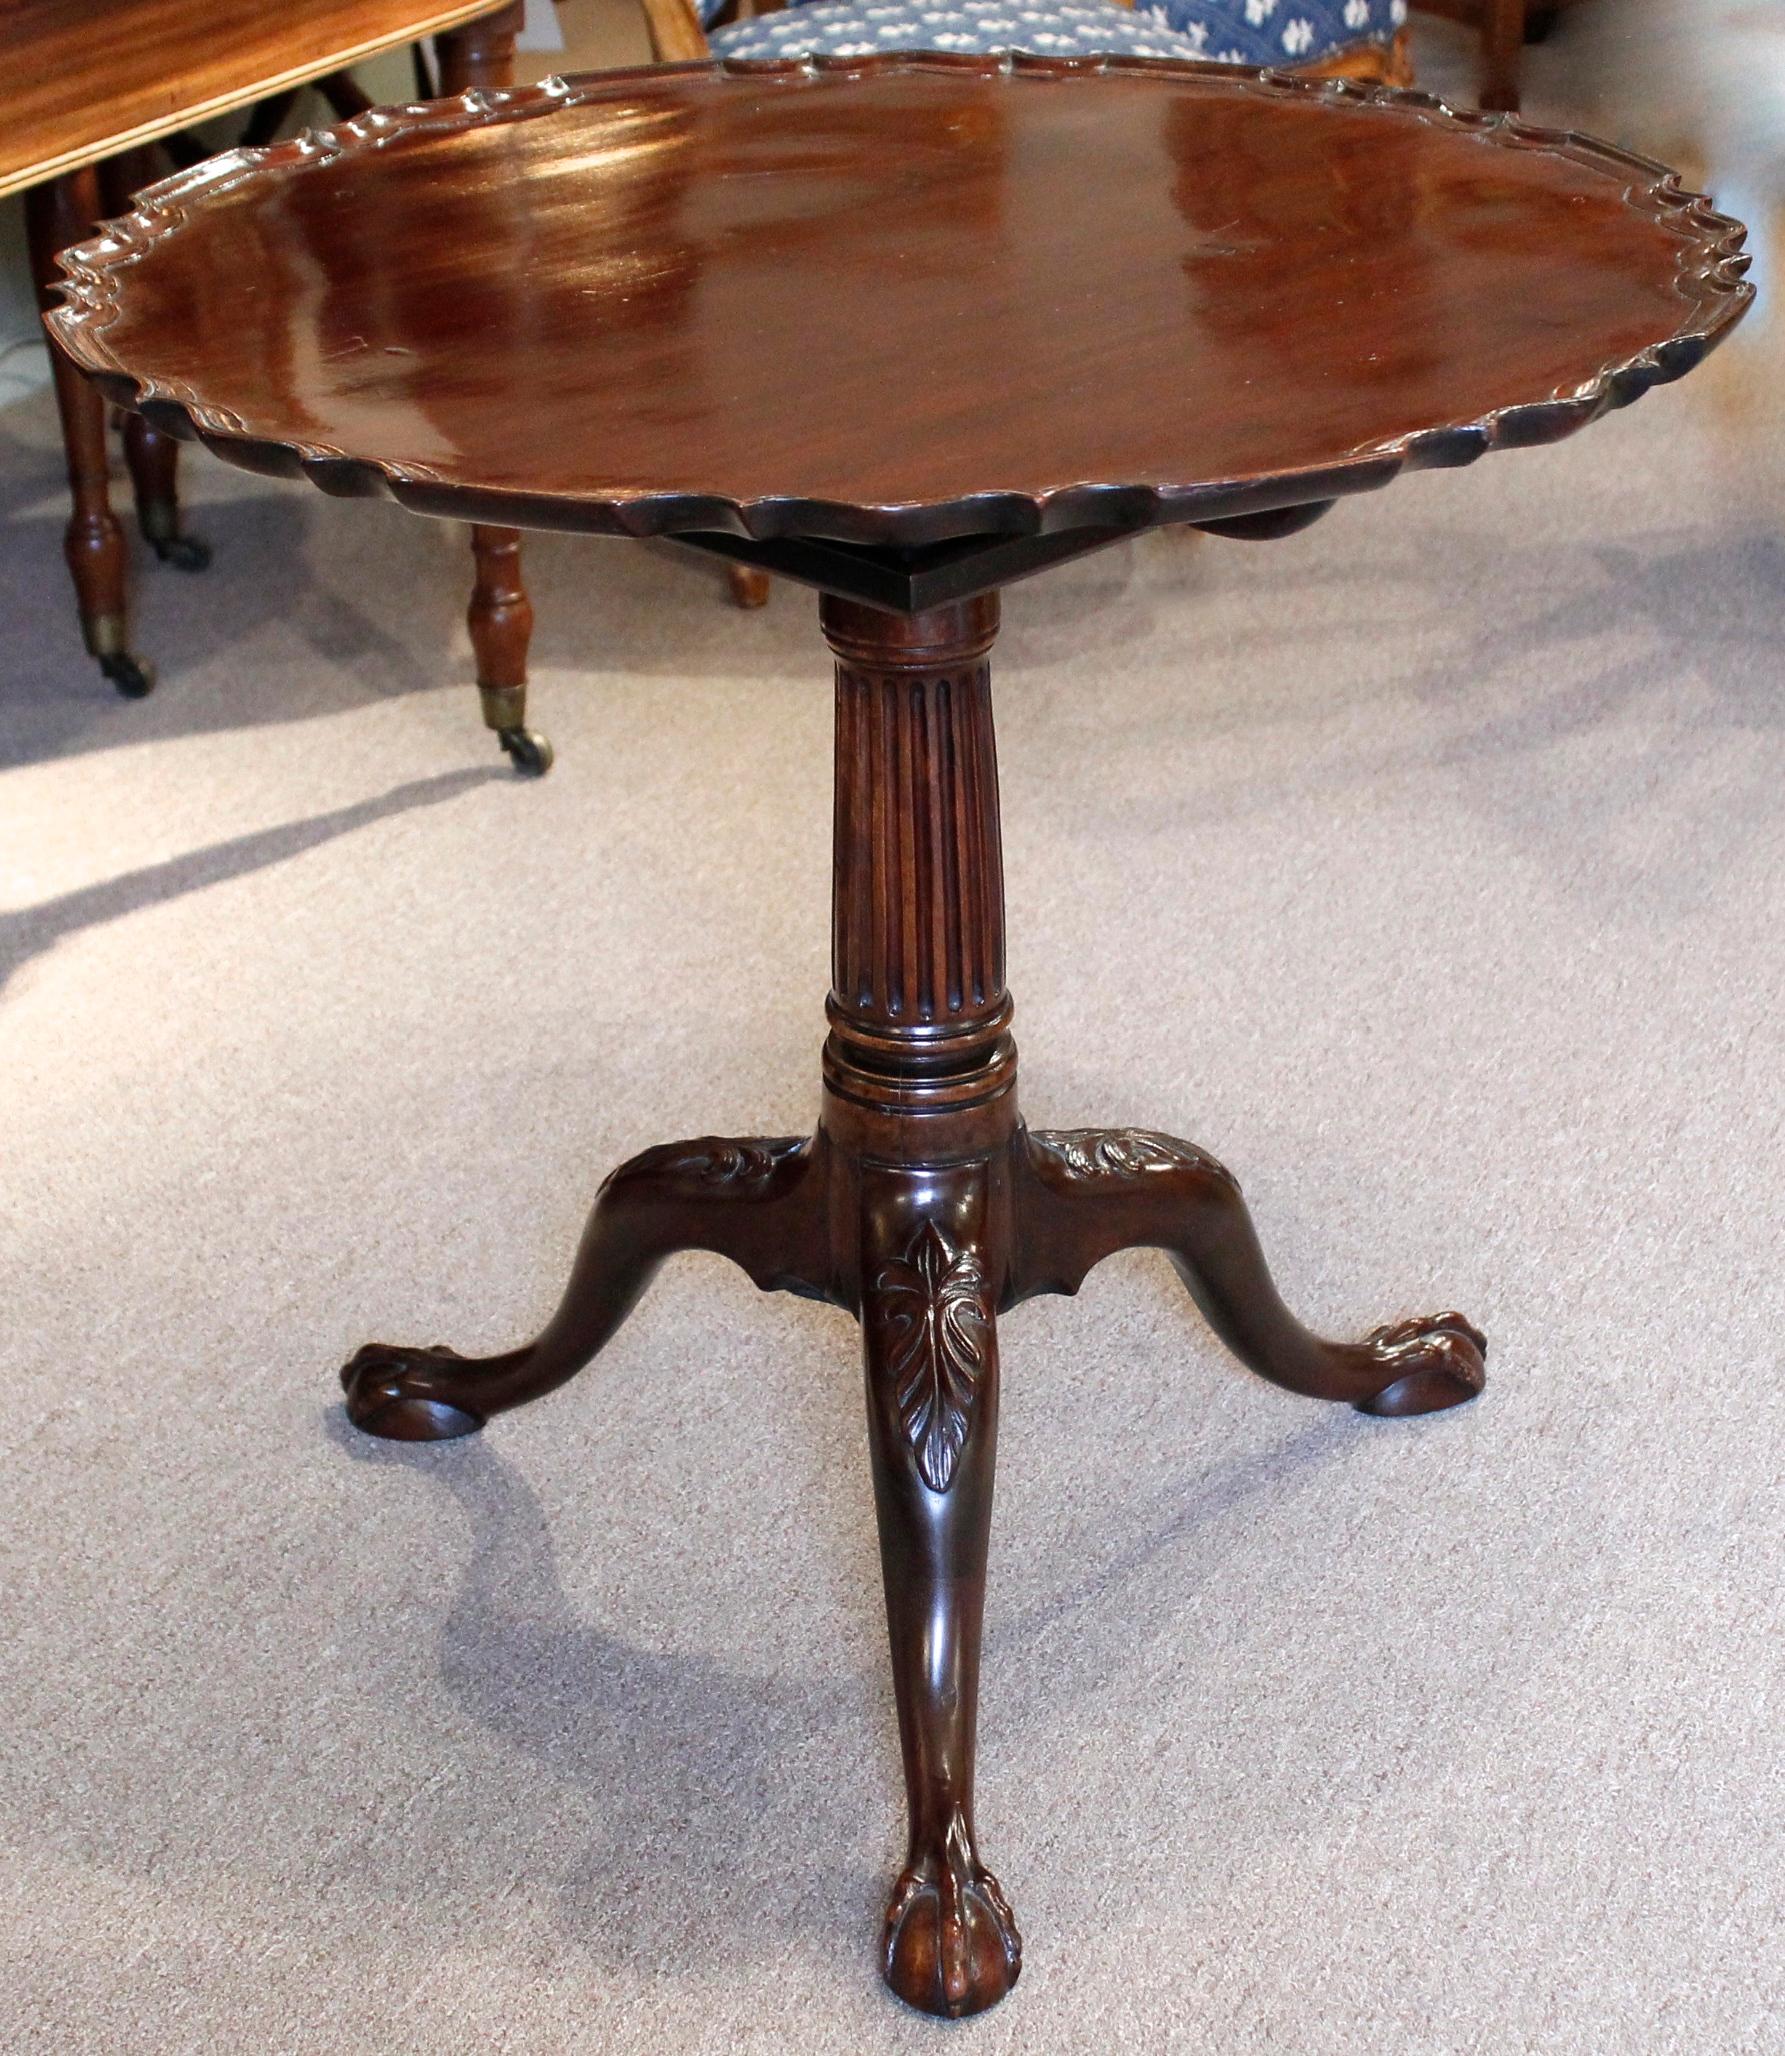 A fine ca. 1760 English single board mahogany tilt top tea table, the pedestal base carved as a substantial and handsome fluted column resting on finely carved downswept legs with carved knees and terminating in elongated ball and claw feet.